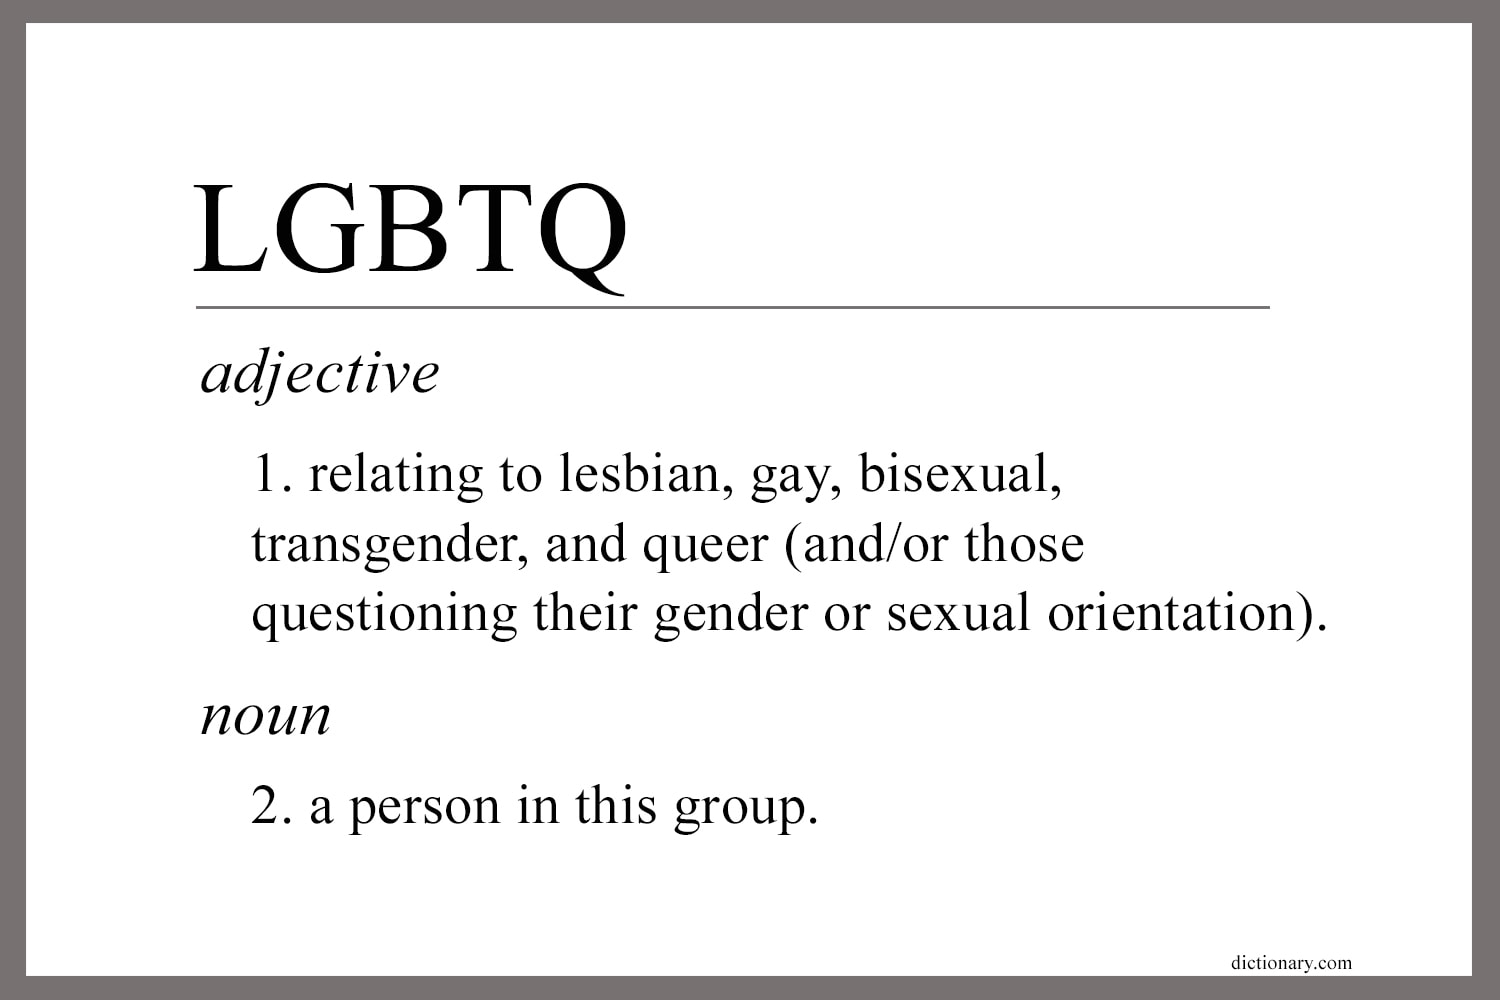 A definition of the initials LGBTQ adapted from dictionary.com. Graphic by Laurens Glass, UM News.